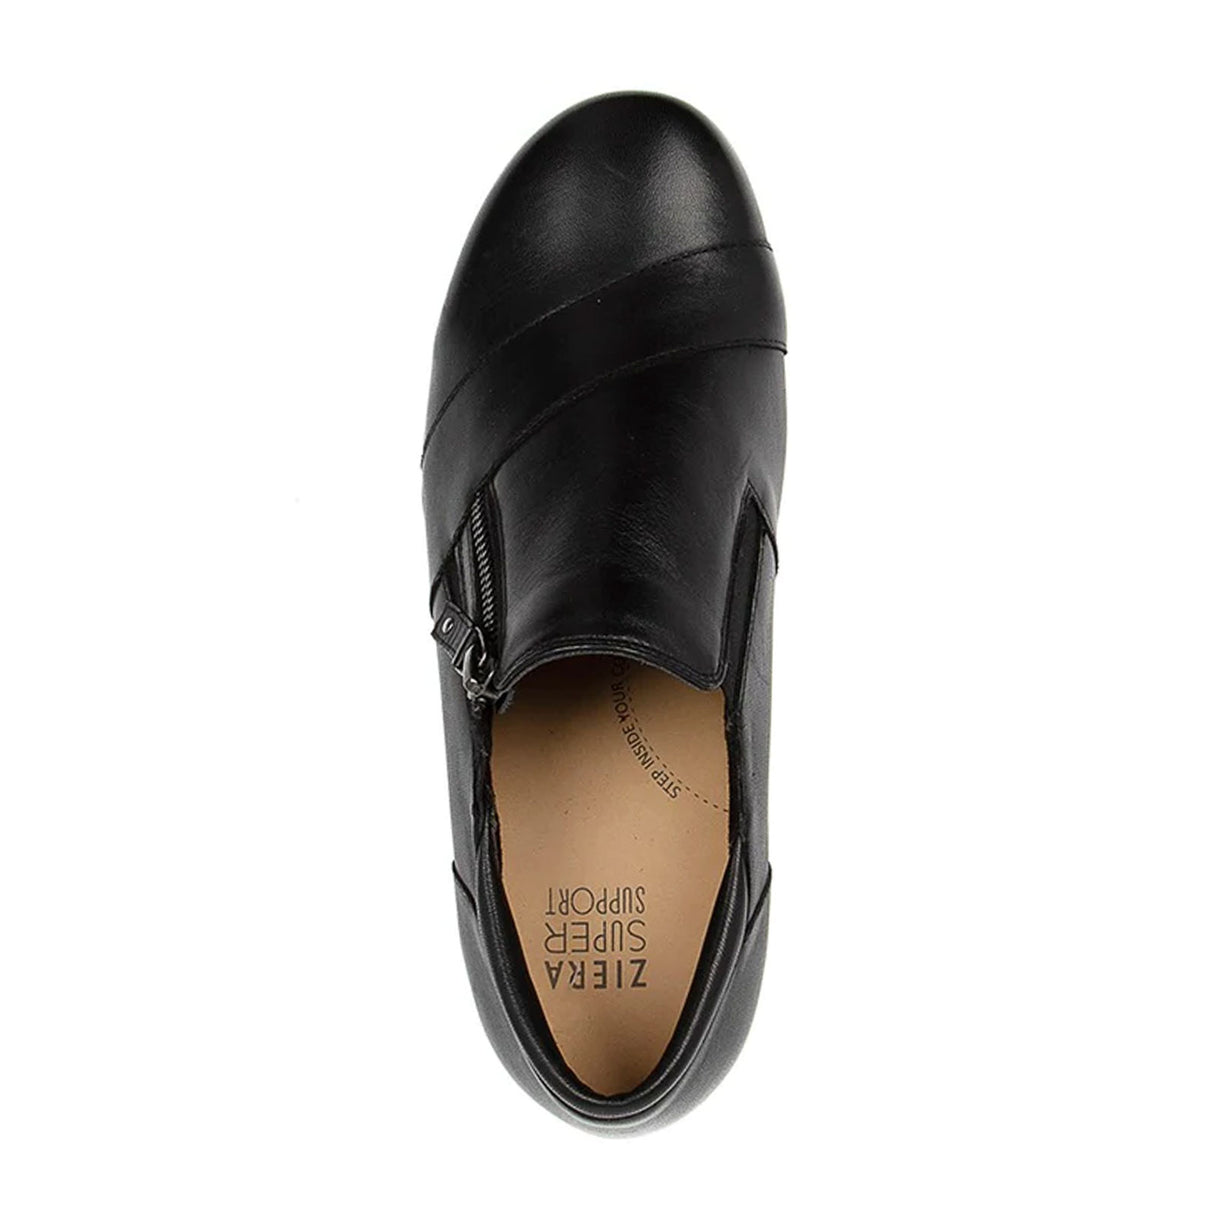 Ziera Sage Extra Wide Slip On (Women) - Black Leather Dress-Casual - Slip Ons - The Heel Shoe Fitters